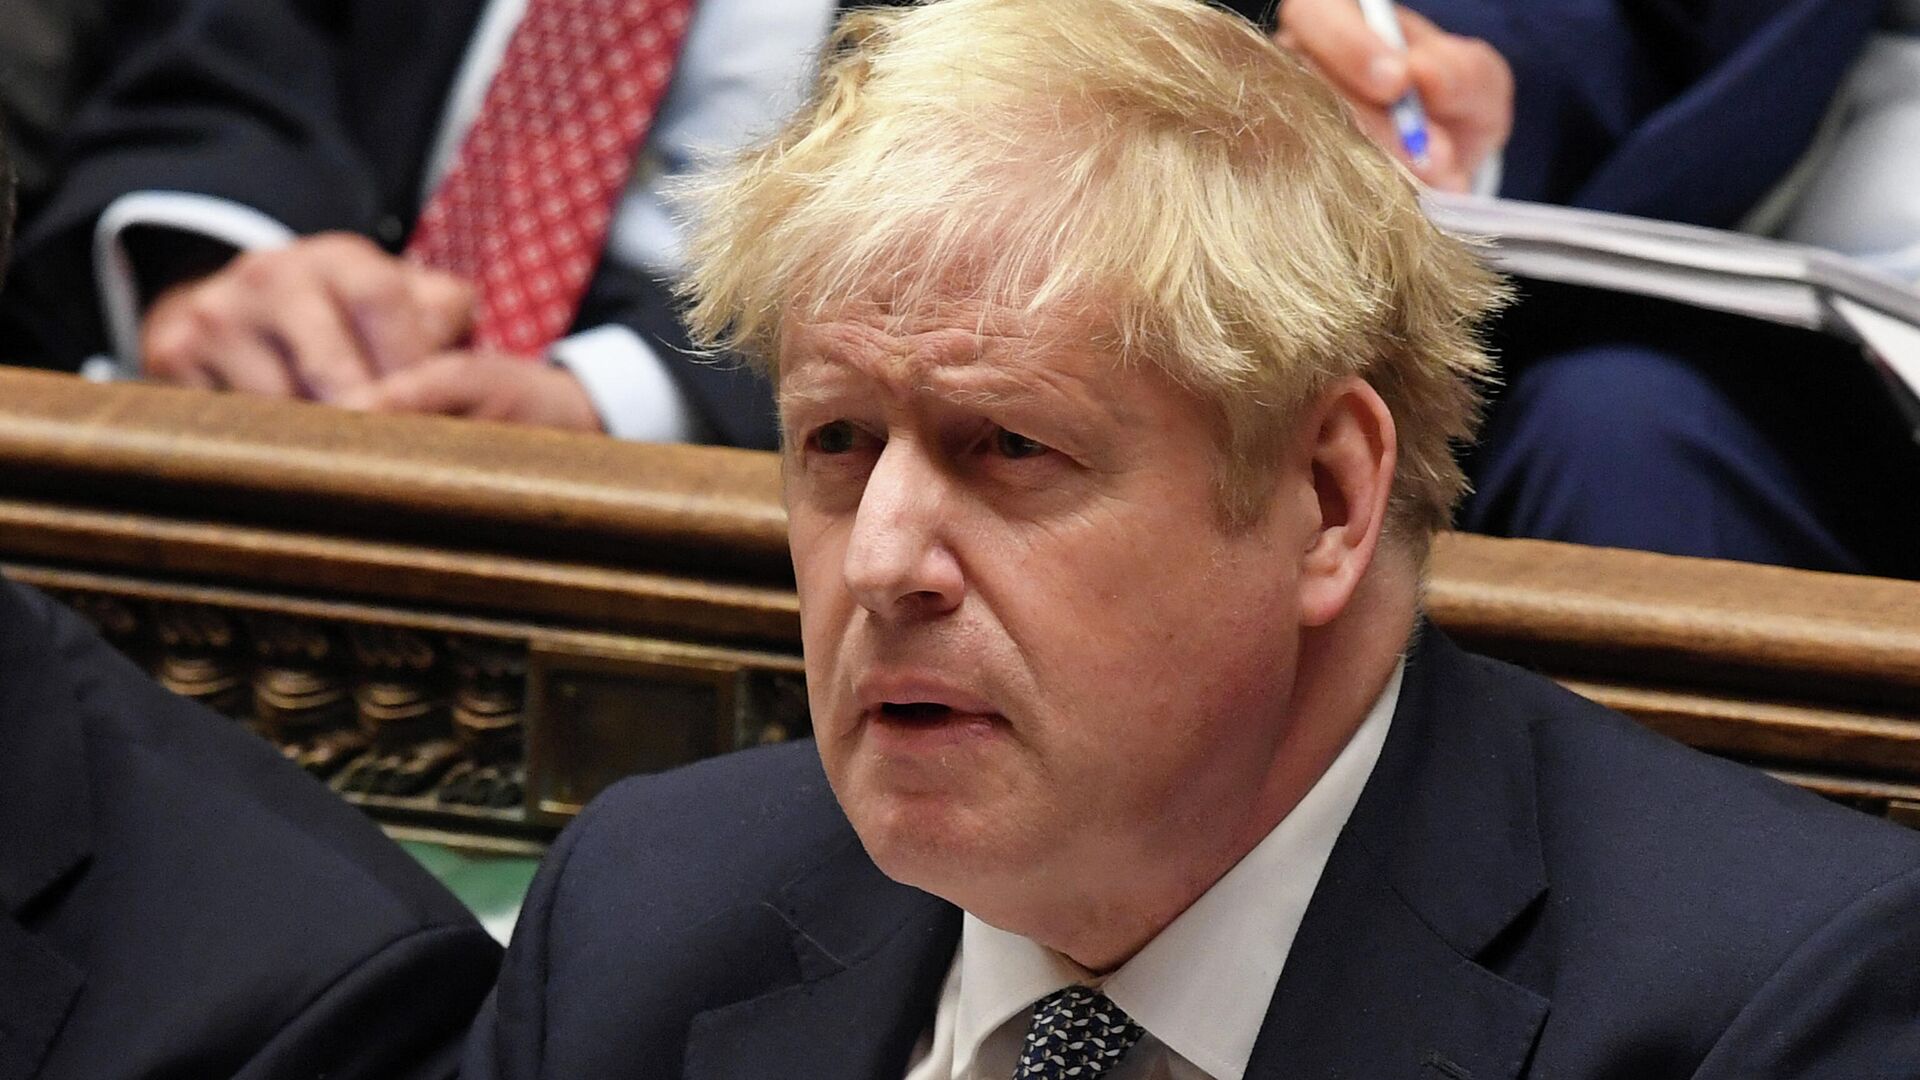 A handout photograph released by the UK Parliament shows Britain's Prime Minister Boris Johnson reacting as Leader of the opposition Labour Party Keir Starmer (unseen) speaks attending Prime Minister's Questions (PMQs) in the House of Commons in London on January 12, 2022. - Sputnik International, 1920, 19.01.2022